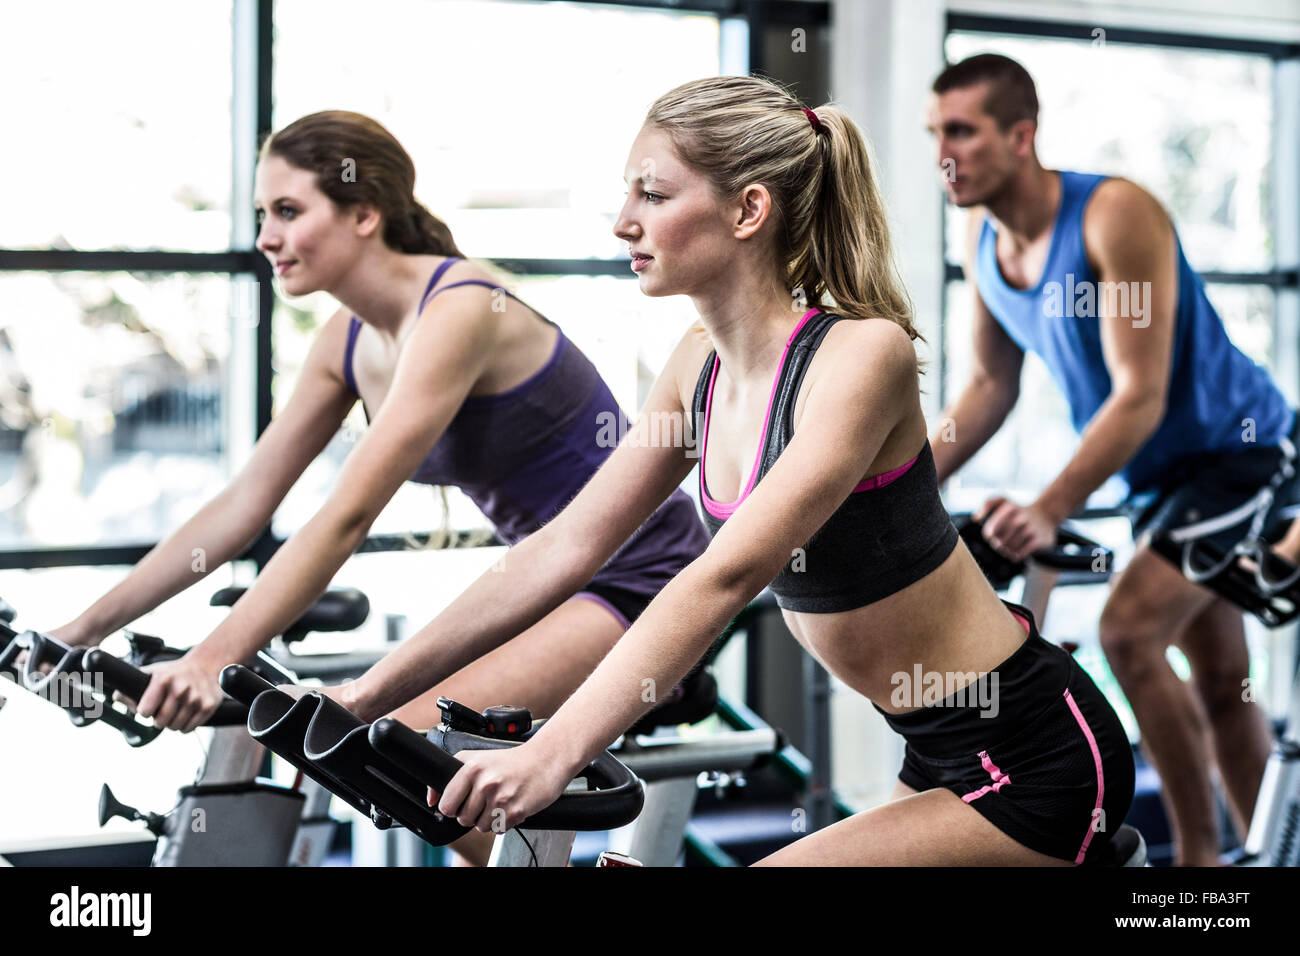 Fit people working out at spinning class Banque D'Images